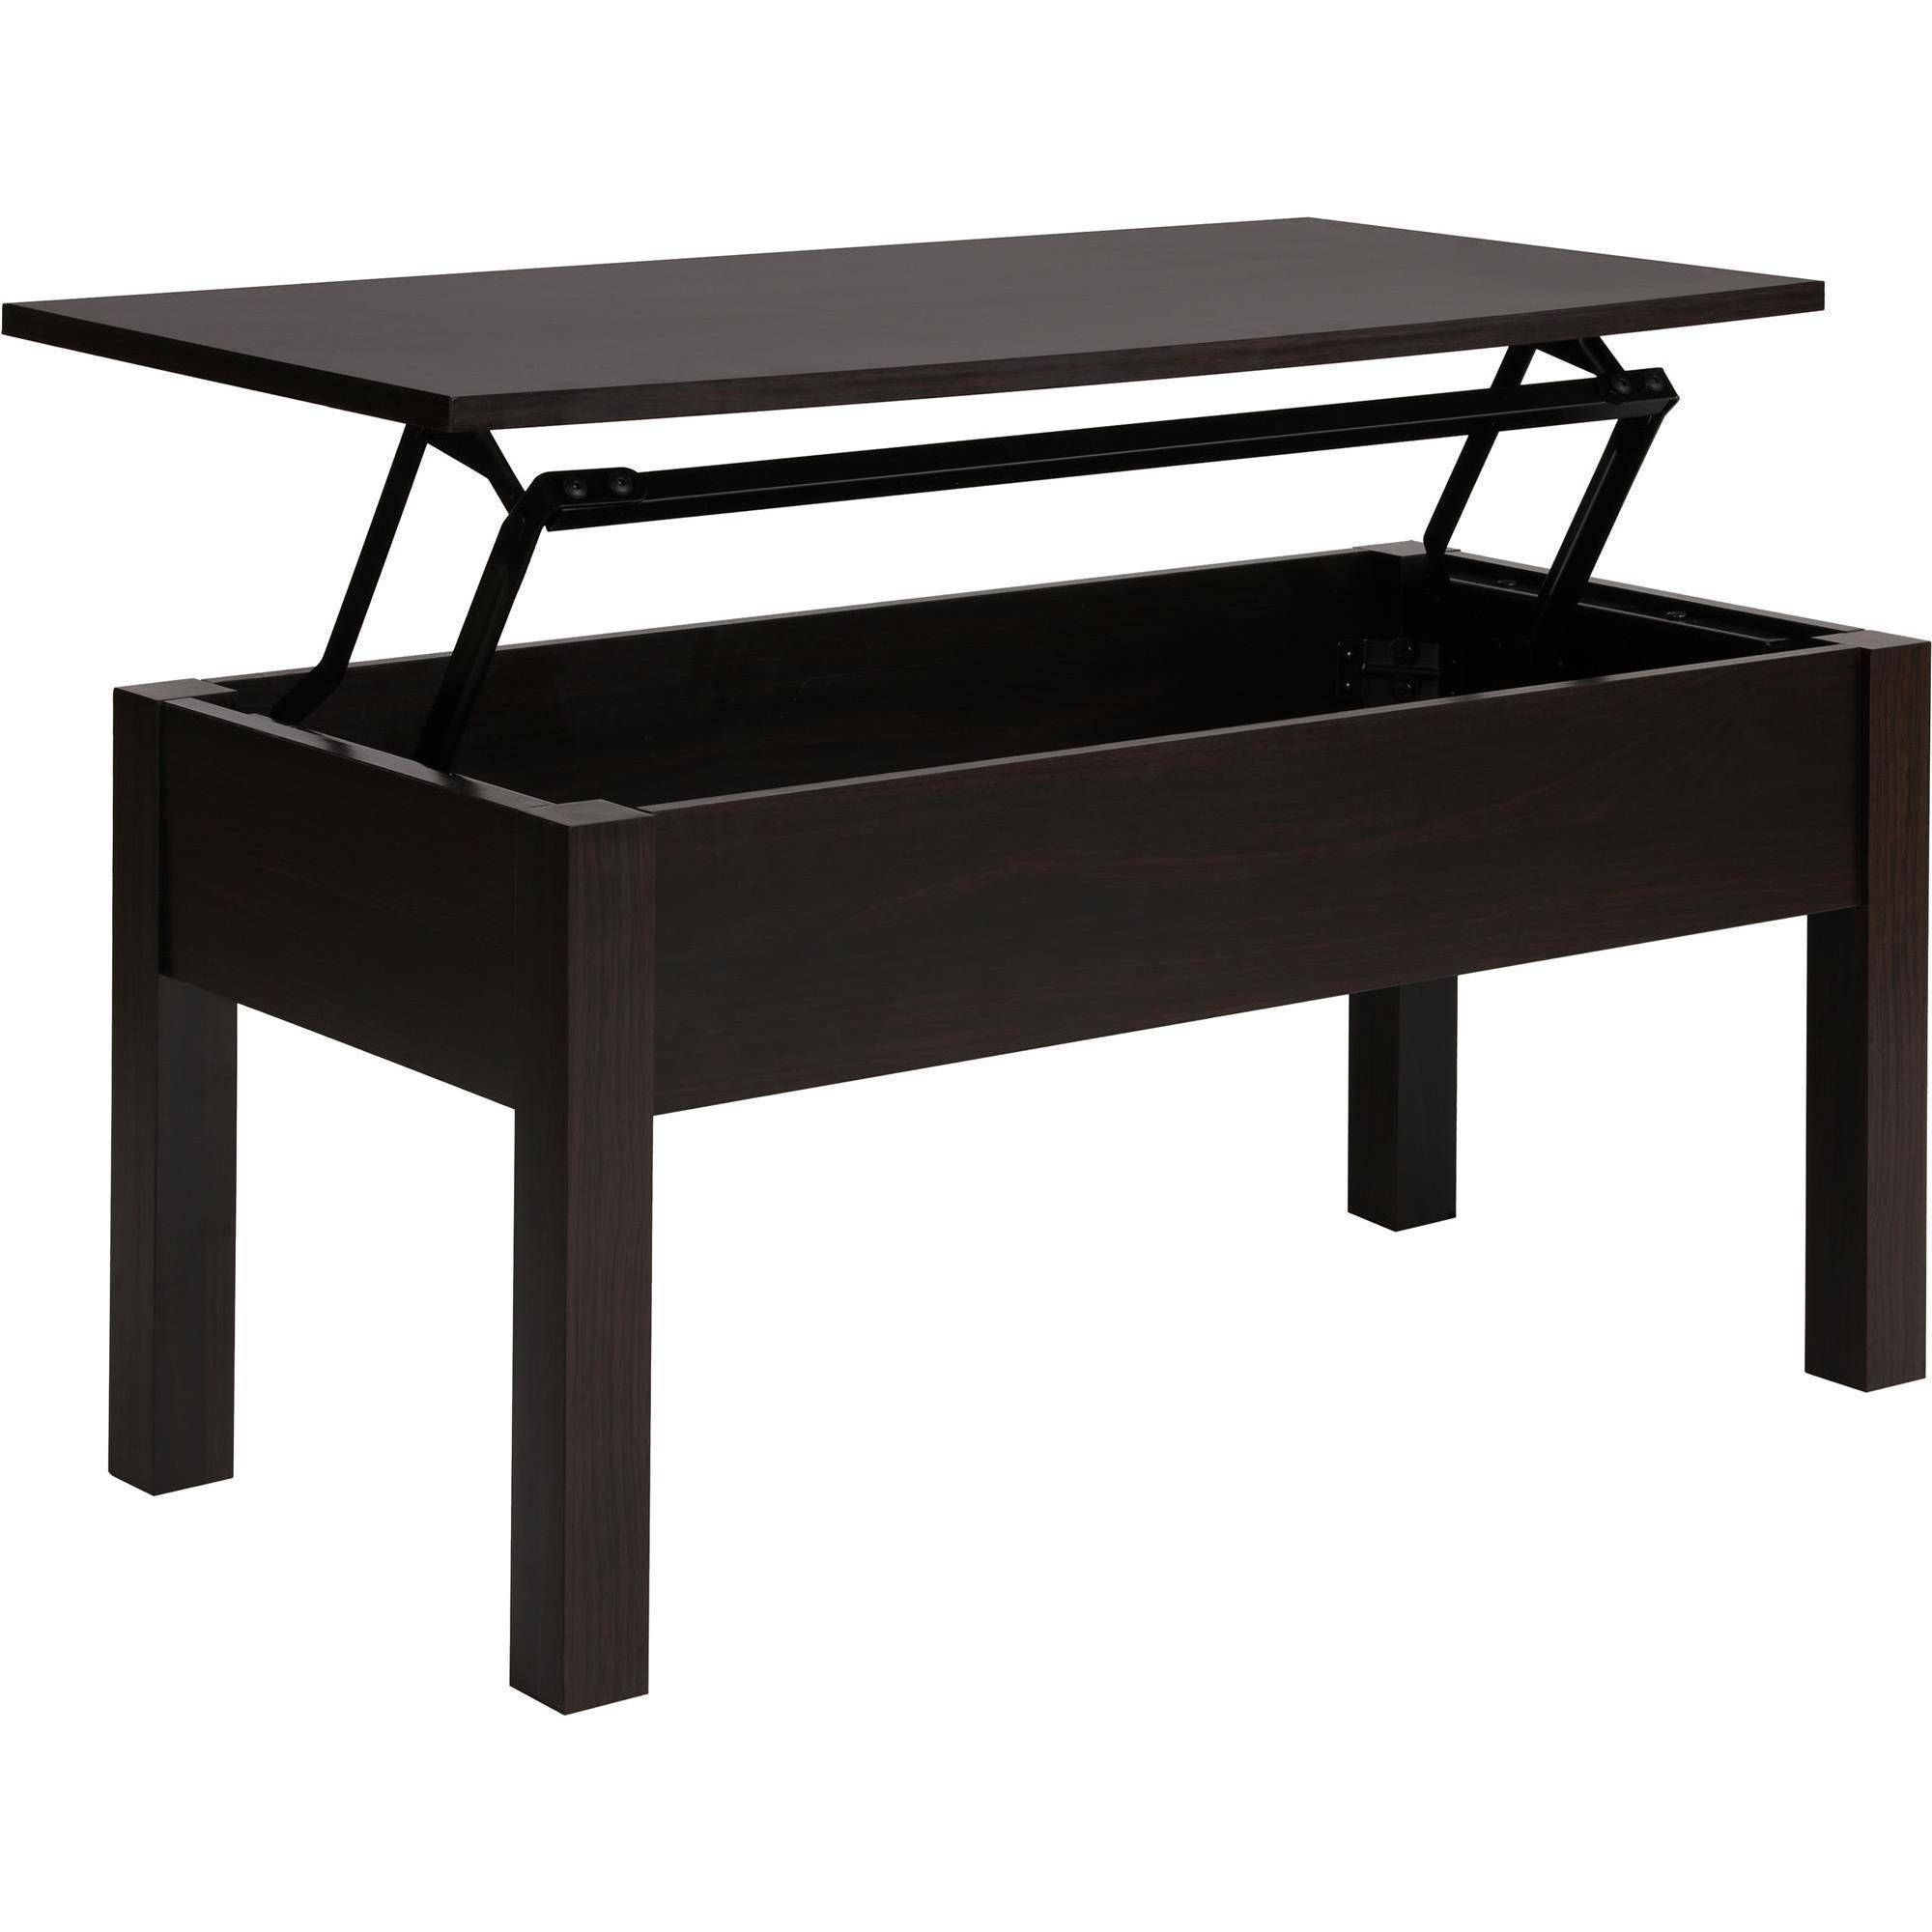 Mainstays Lift Top Coffee Table, Multiple Colors – Walmart With Coffee Table With Raised Top (View 4 of 30)